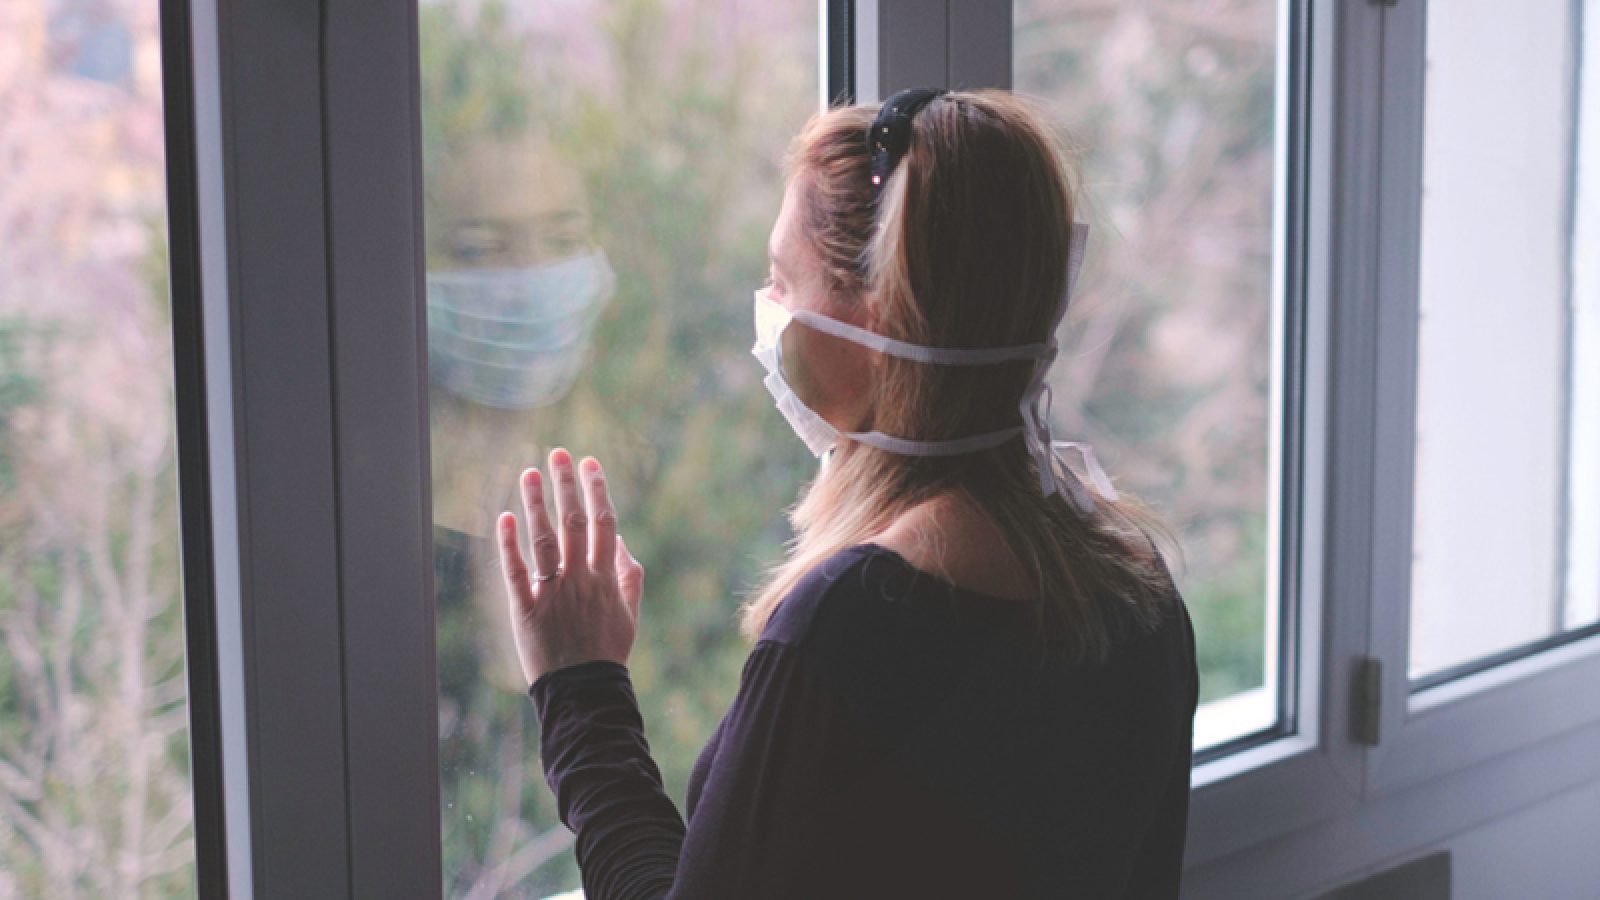 Woman inside wearing mask pressing her hand against a window